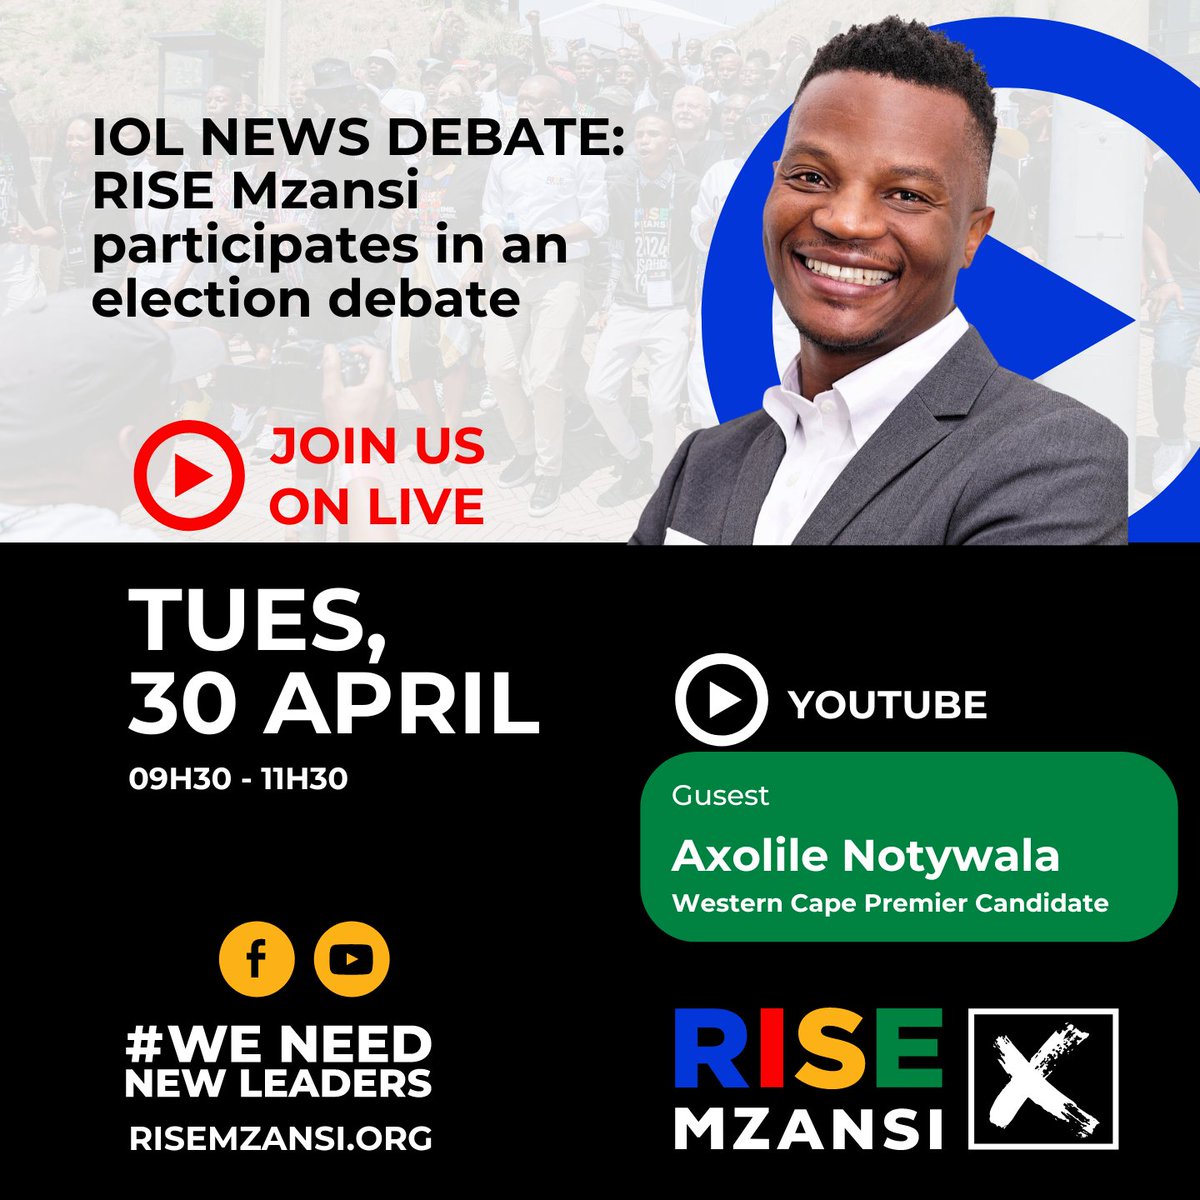 Join @AxolileNotywala, Western Cape Premier Candidate, live at IOL news debate talking about the upcoming elections. 

To follow the conversation, please click the link: rb.gy/24frjd

#AxolileForWCPremier  #WeNeedNewLeaders